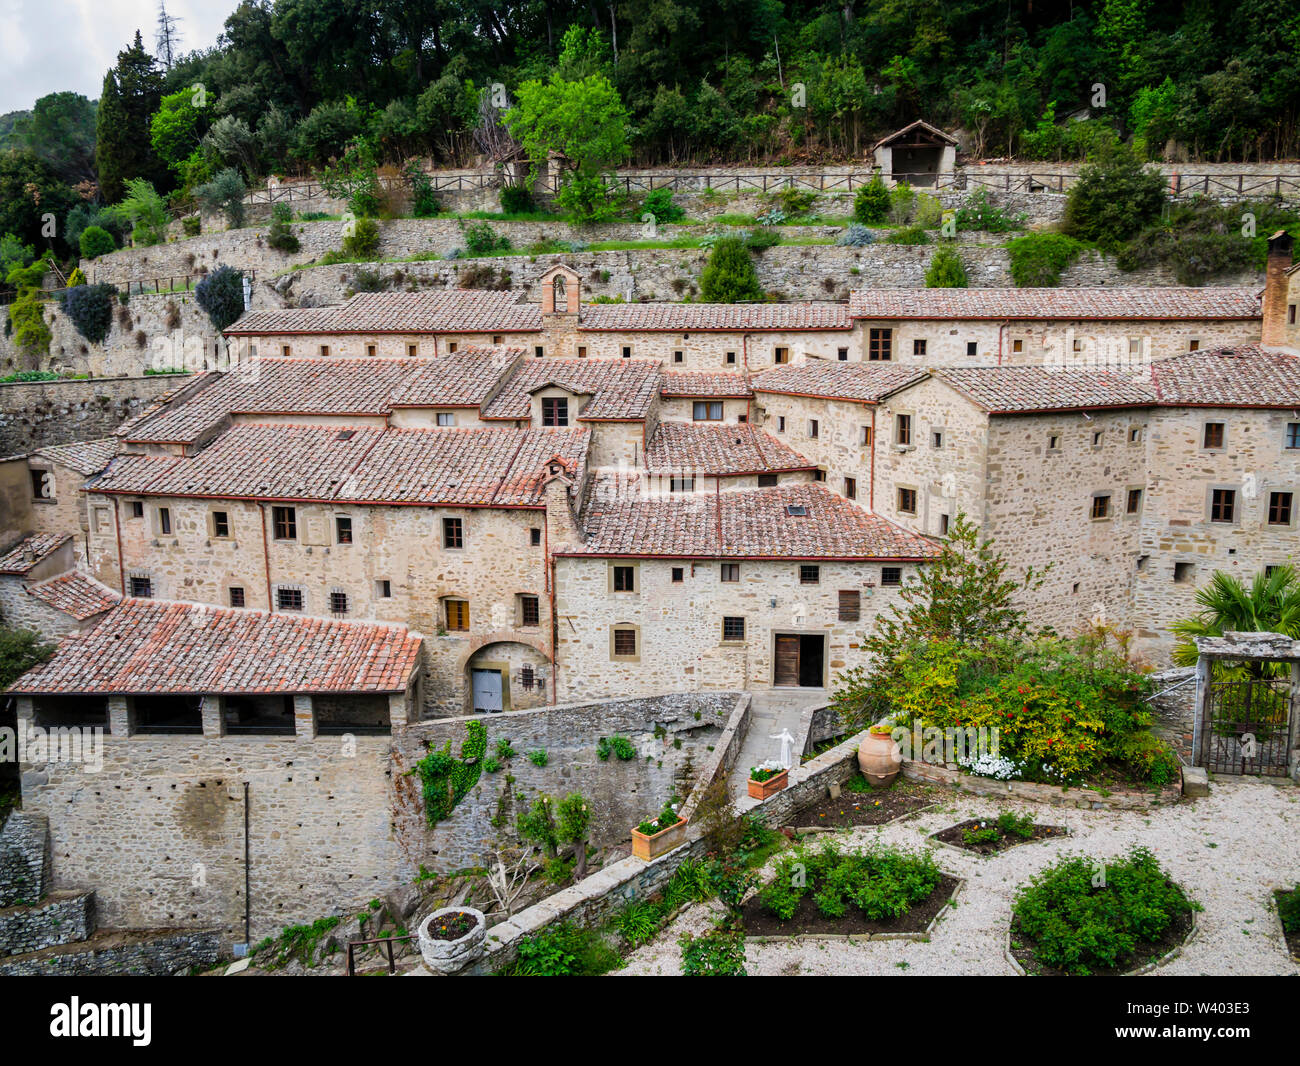 Panoramic view of Le Celle sanctuary, franciscan monastery in Cortona, Tuscany, Italy Stock Photo